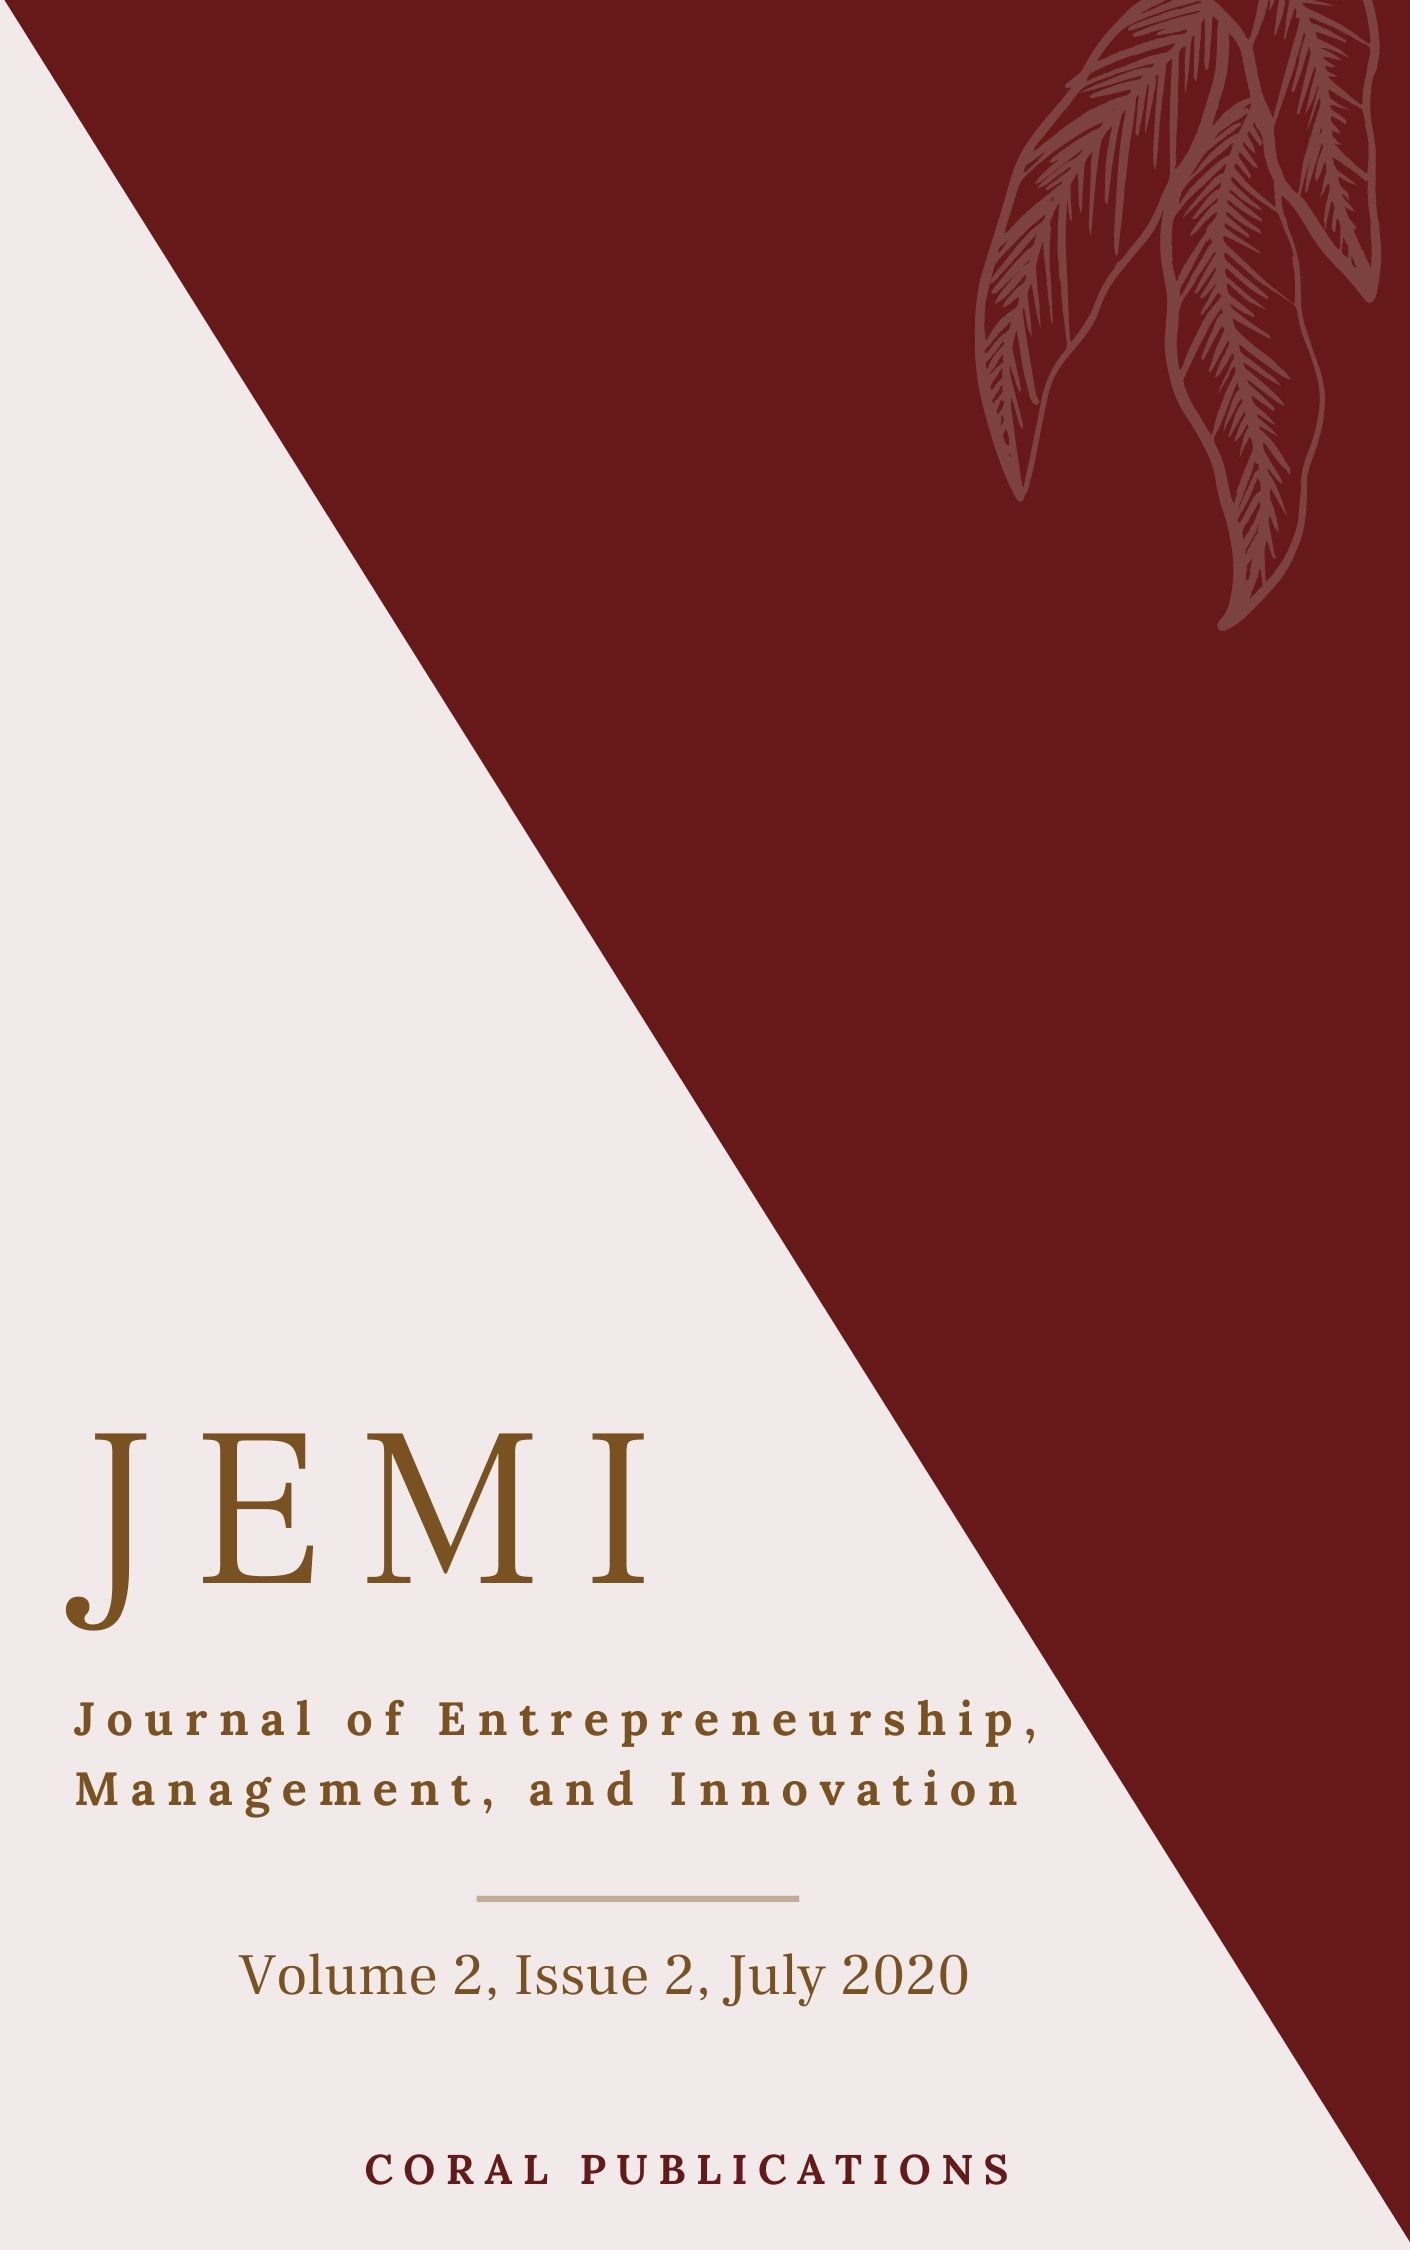 					View Vol. 2 No. 2 (2020): Journal of Entrepreneurship, Management, and Innovation, Volume 2, Issue 2, July 2020
				